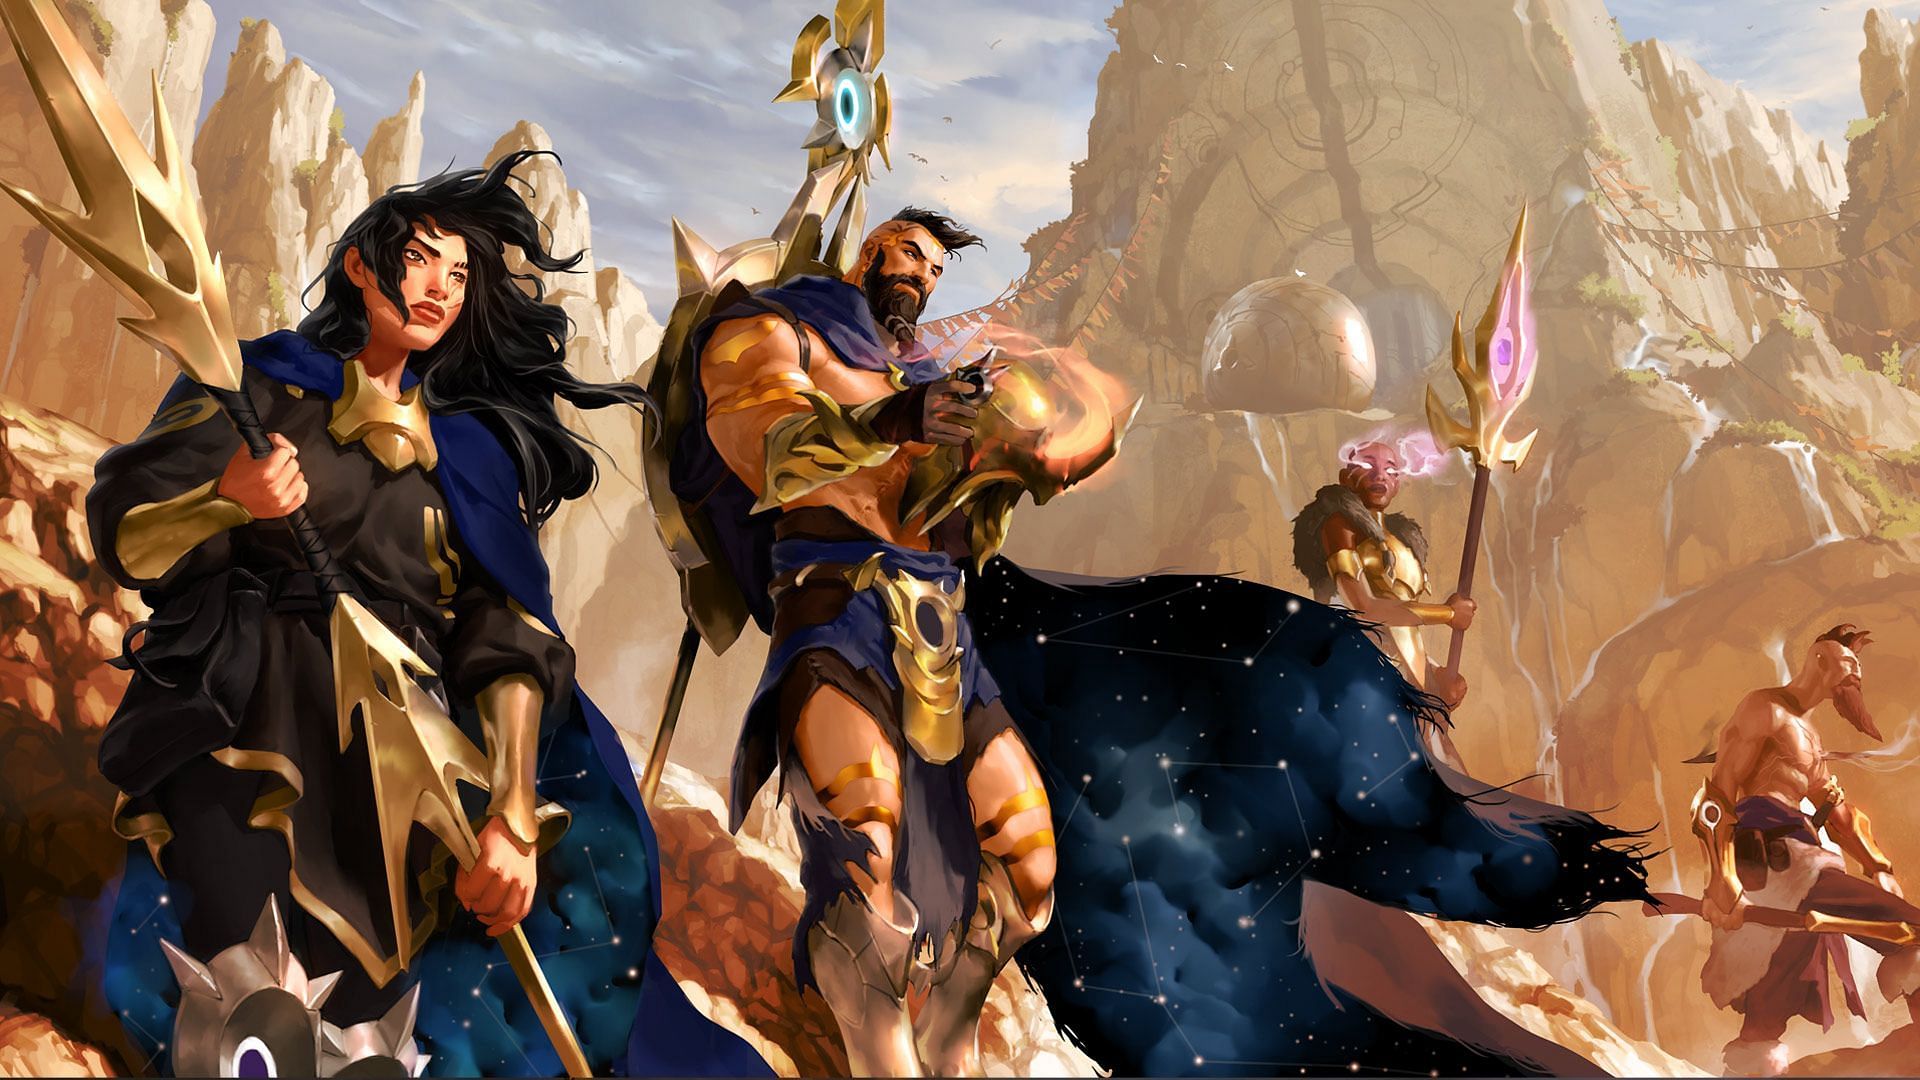 Legends of Runeterra Patch 3.0.0 is now live (Image via Riot Games)